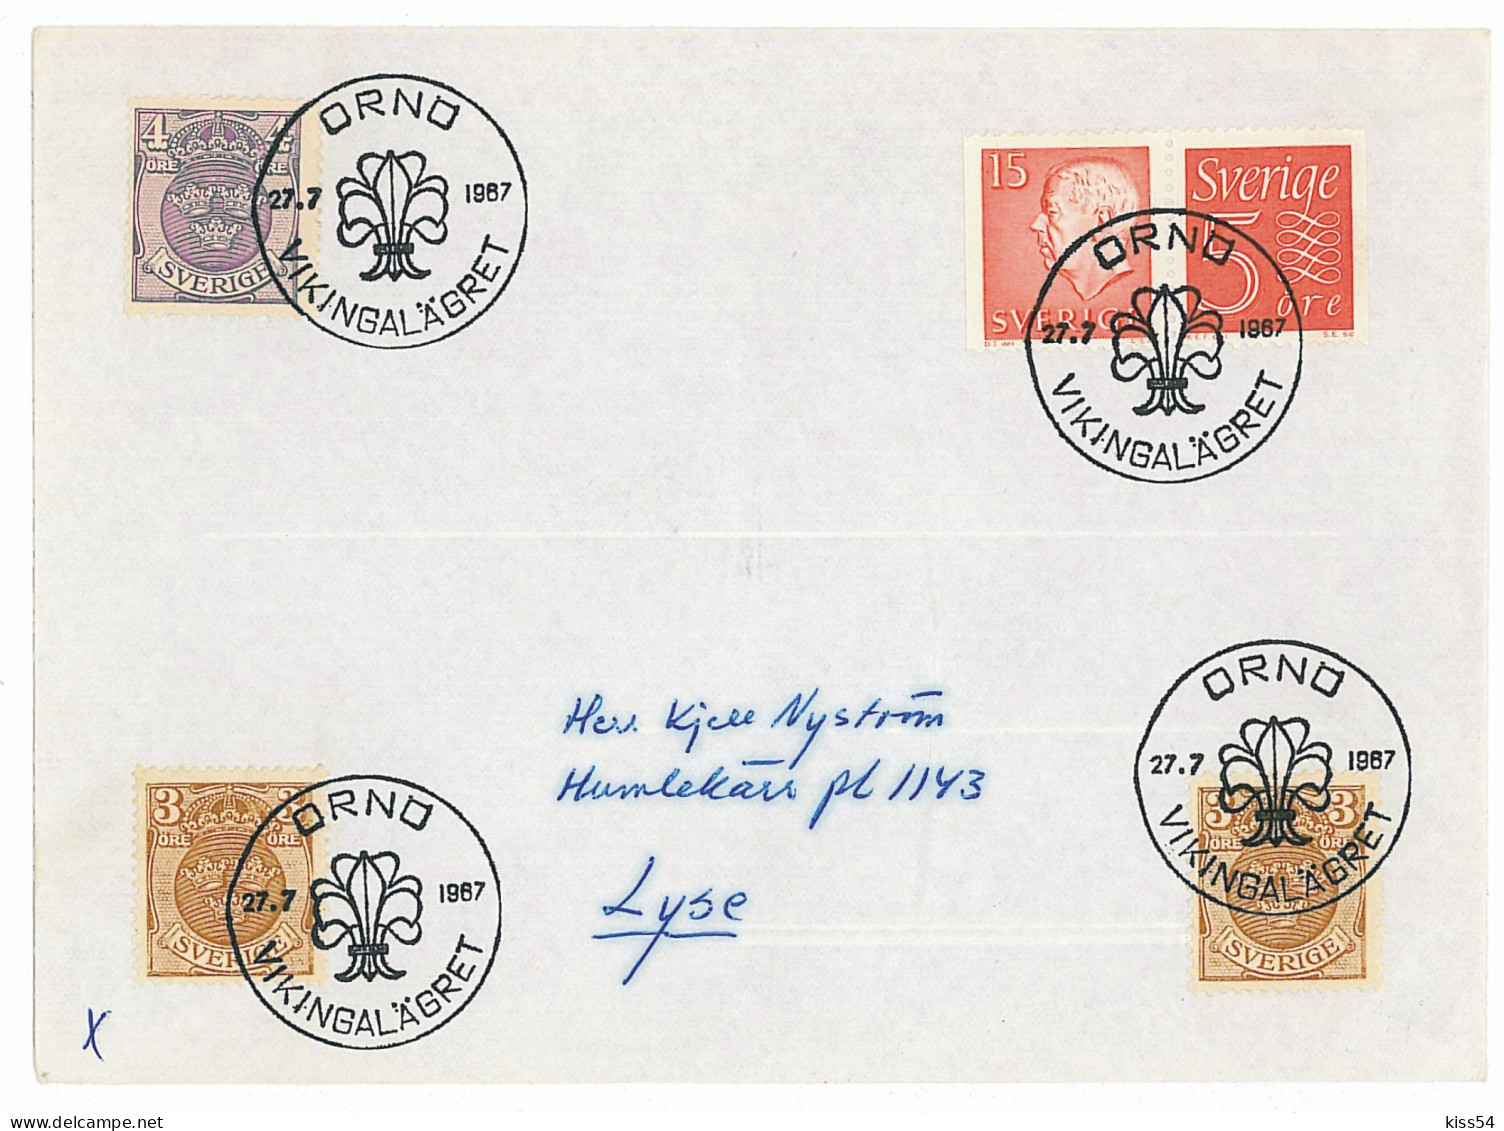 SC 06 - 225 SCOUT, Sweden - Cover  - Used - 1967 - Covers & Documents